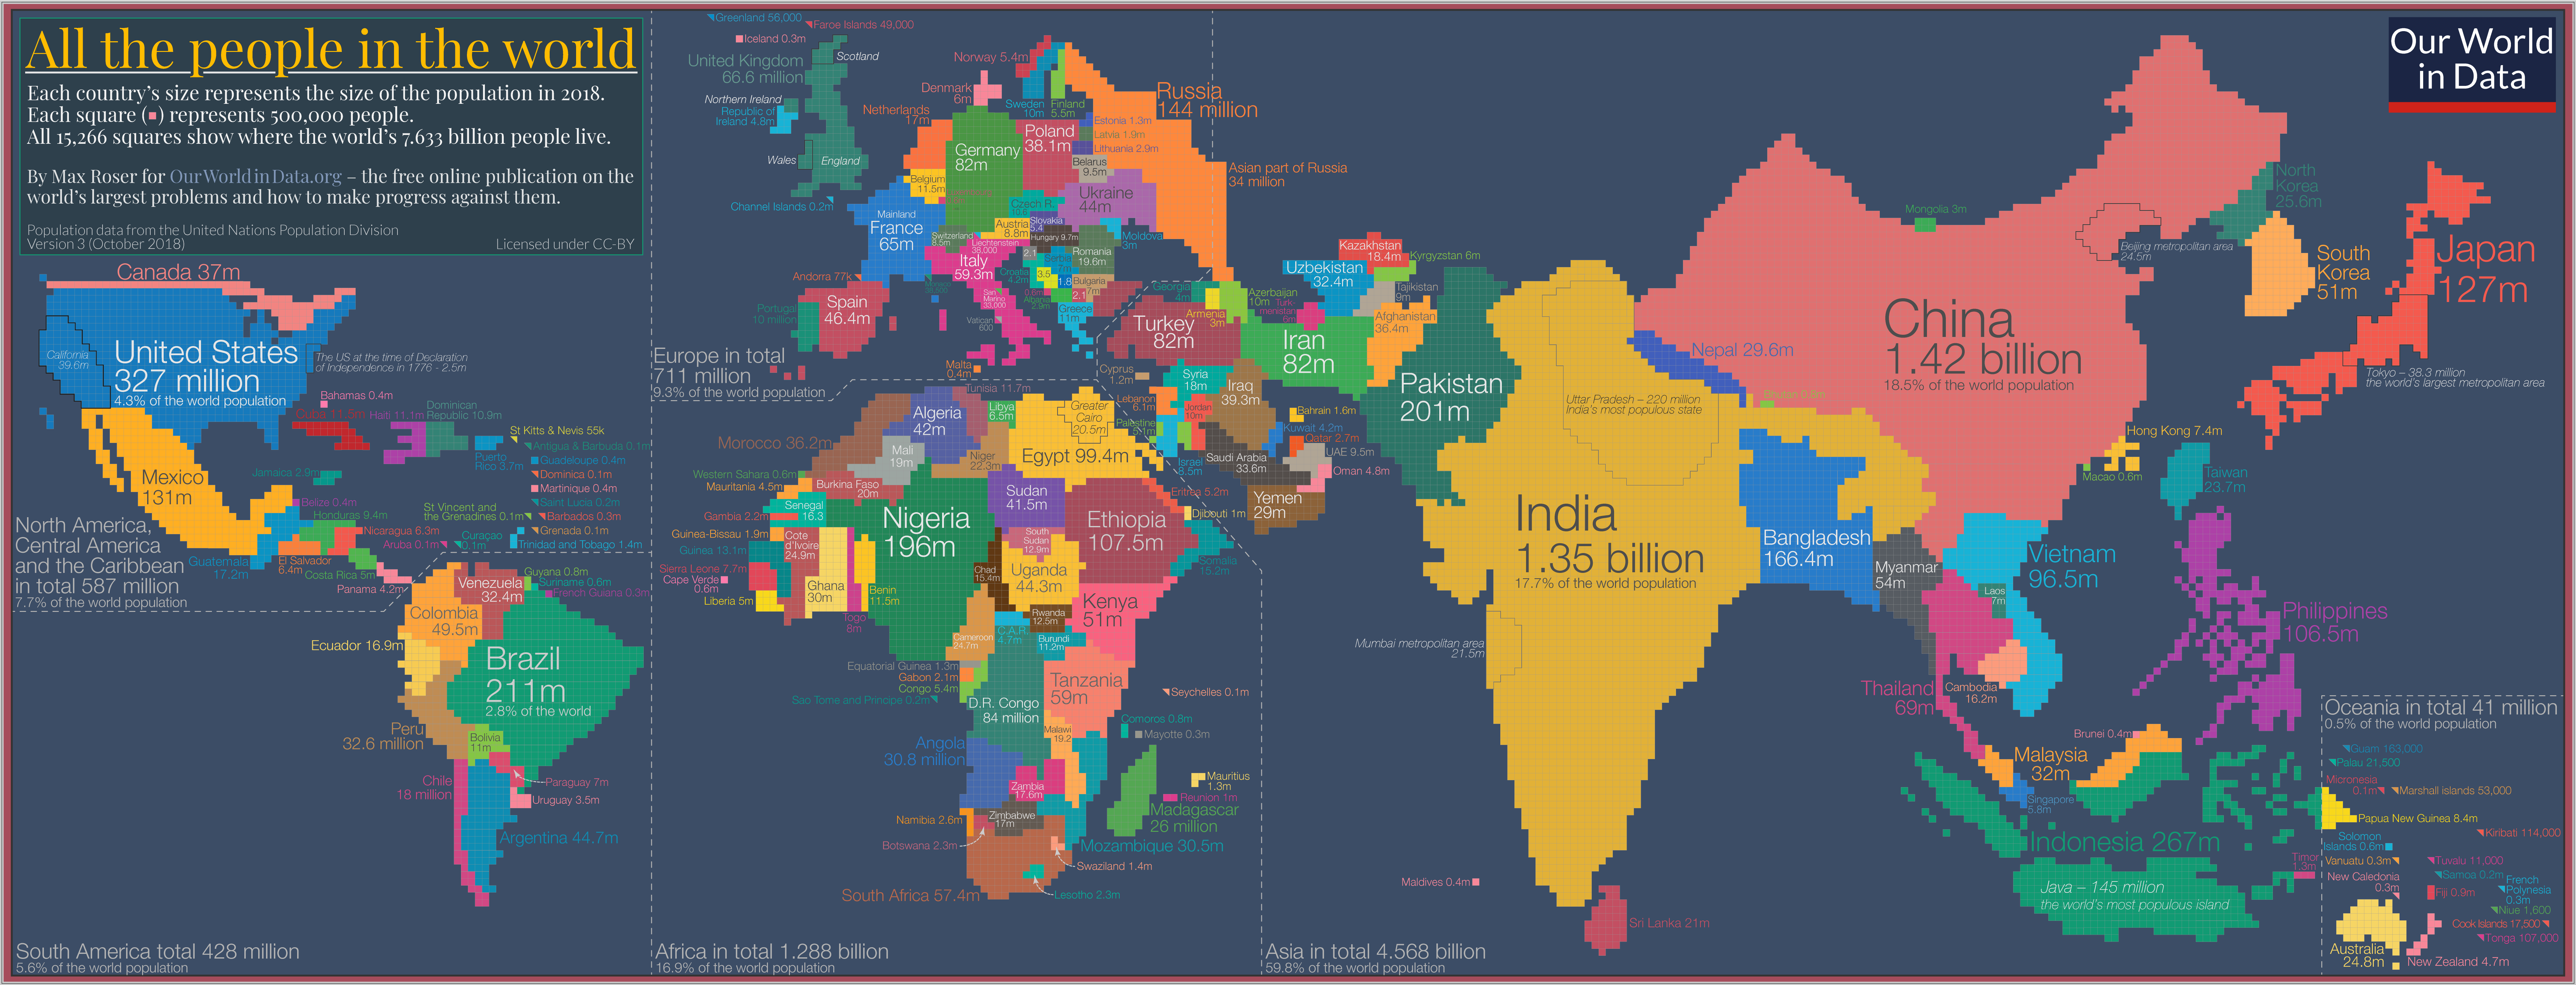 The map we need we to about how global living conditions are changing - Our World in Data